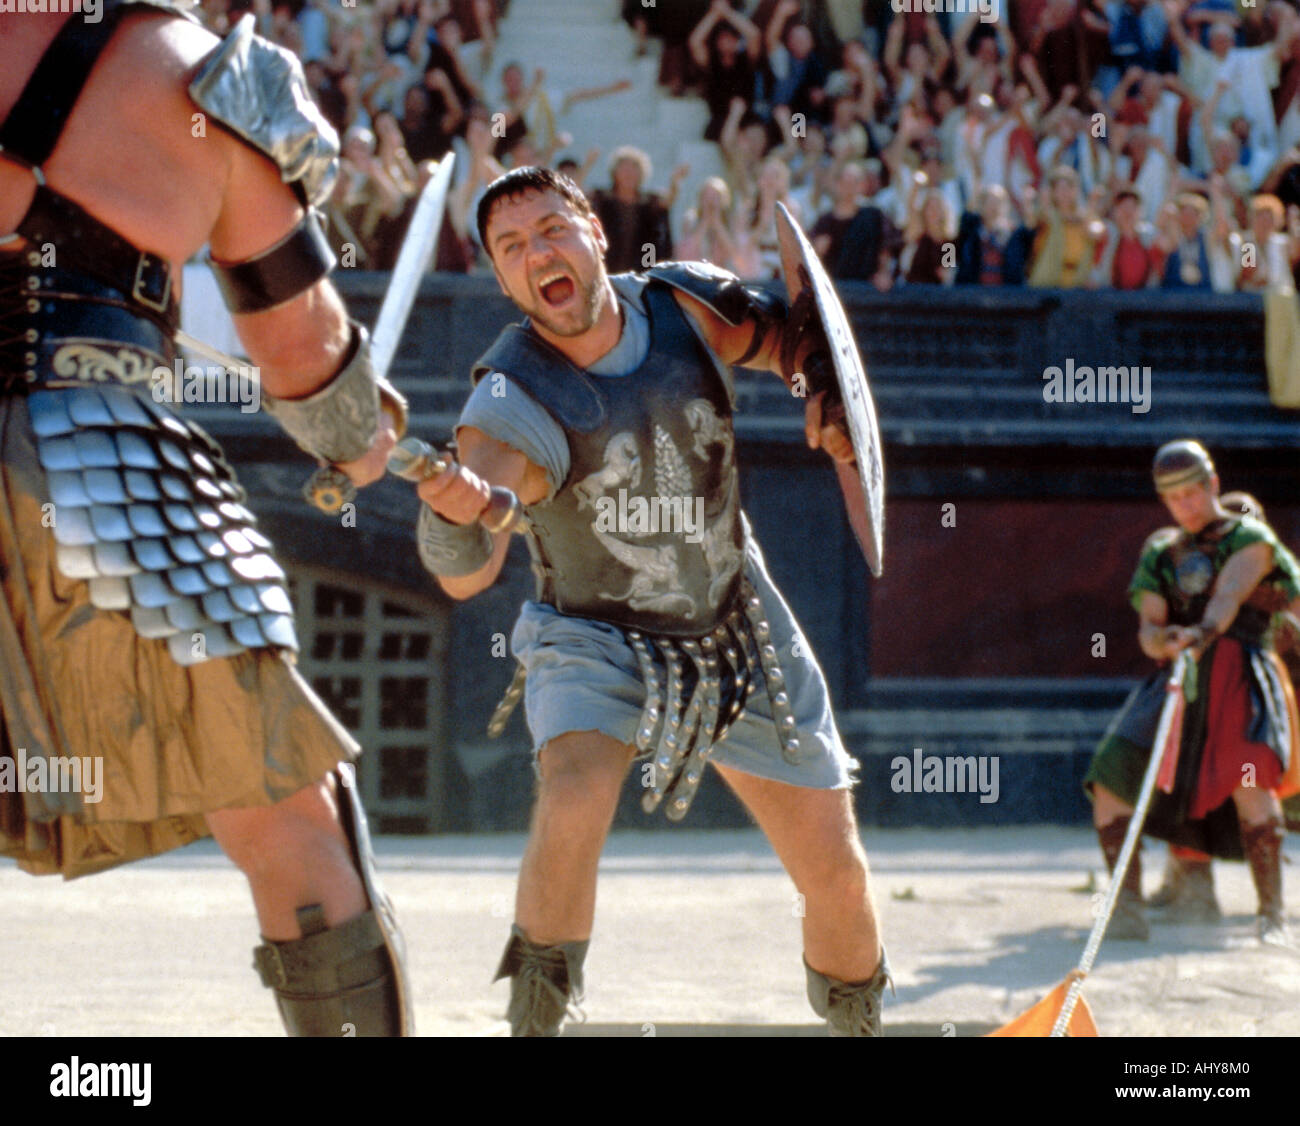 GLADIATOR 2000 Universal film avec Russell Crowe Banque D'Images